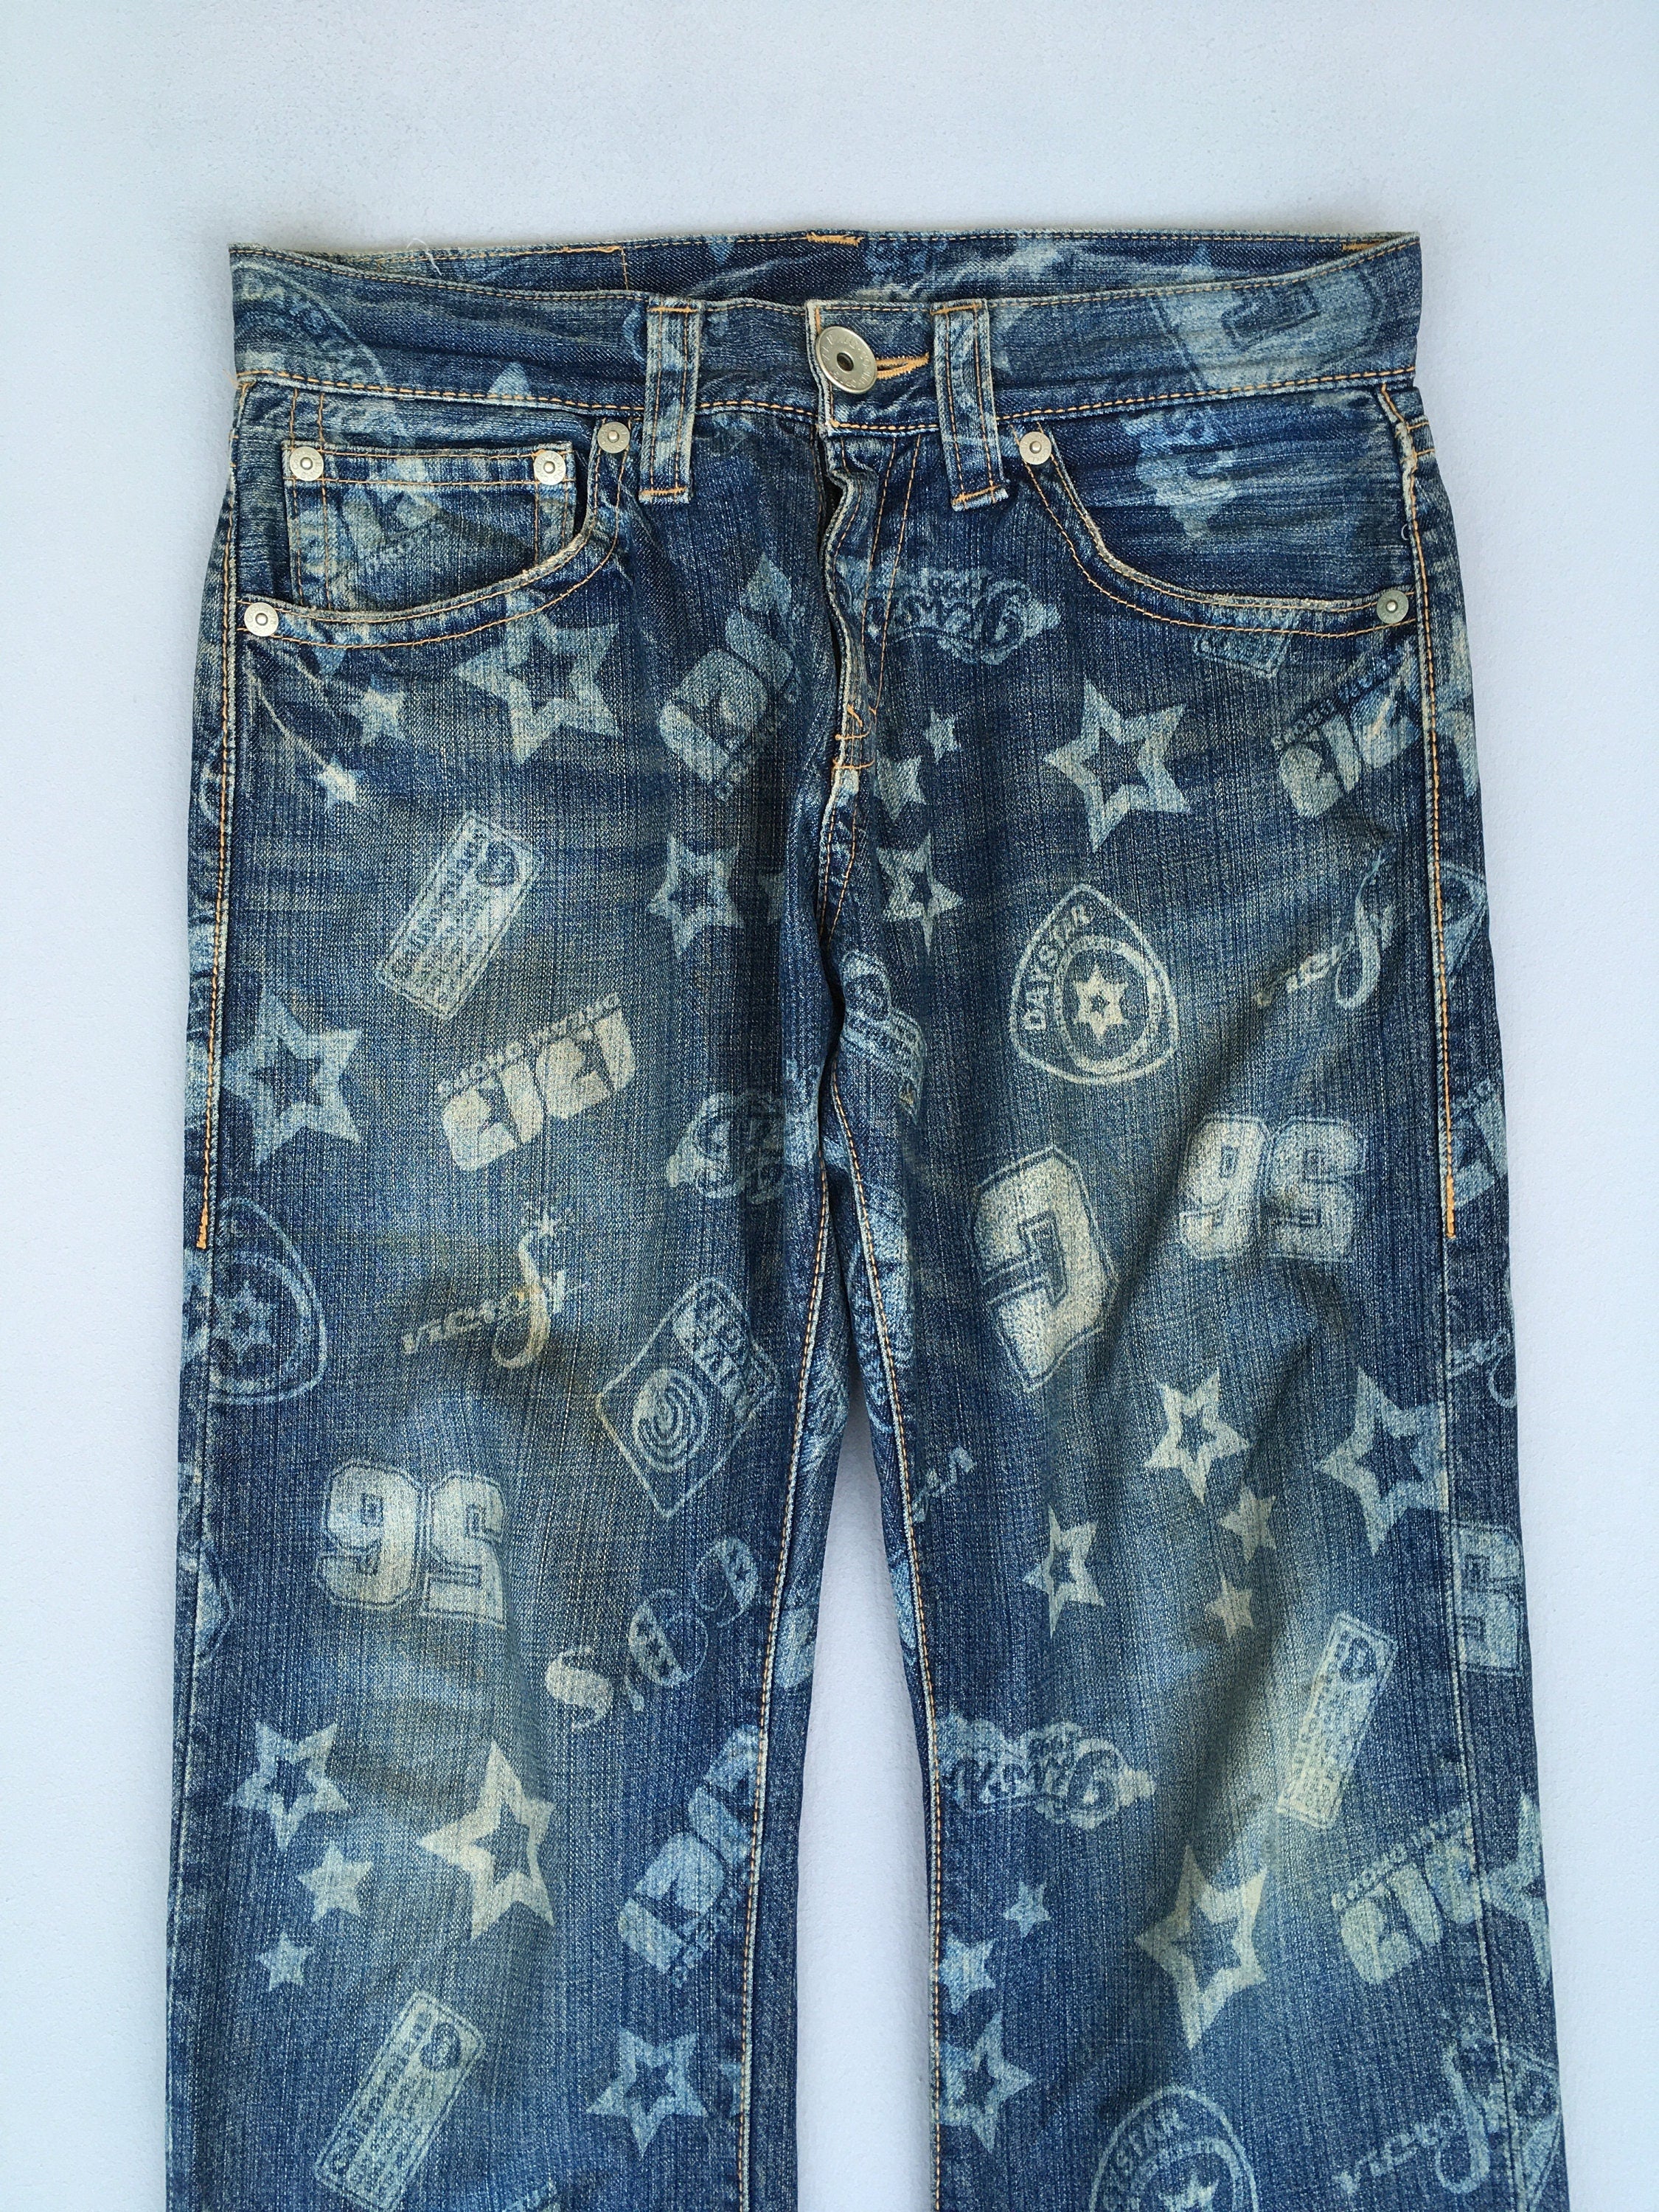 Co&Lu Japan Overprinted Jeans Size 32x30 – axevin